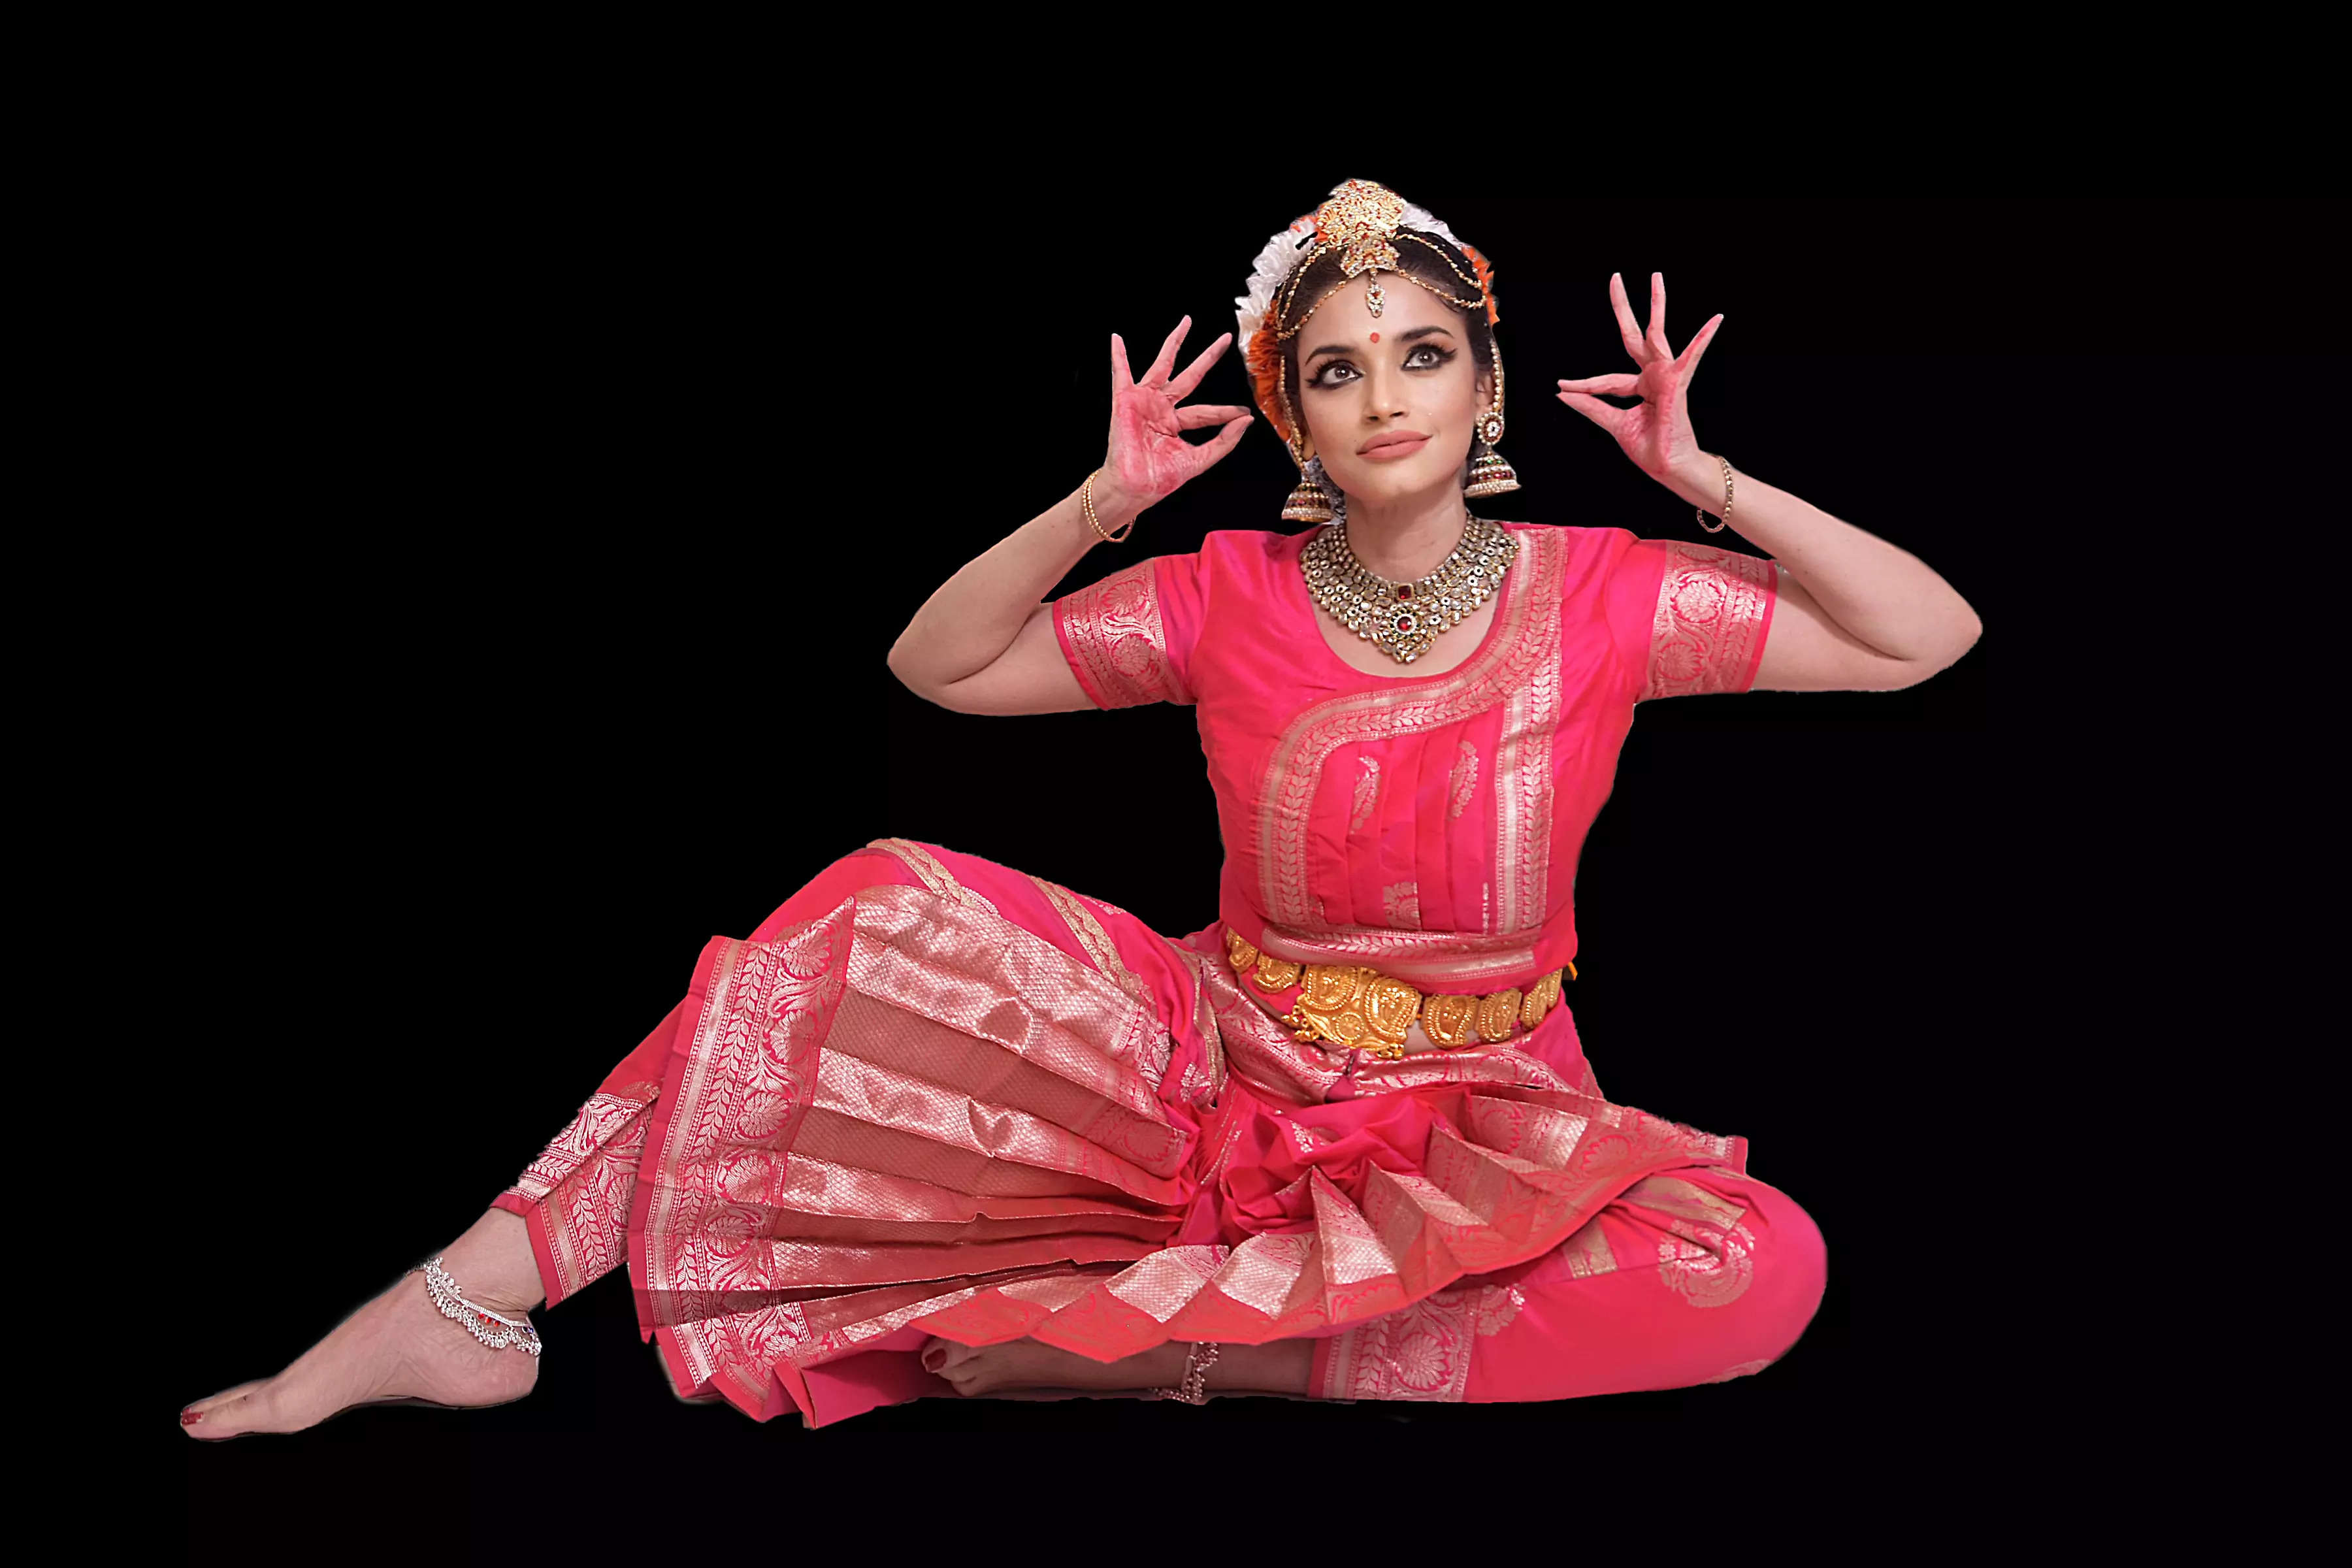 Dancer Sohini Roychowdhury talks about what she has planned for her Europe tour